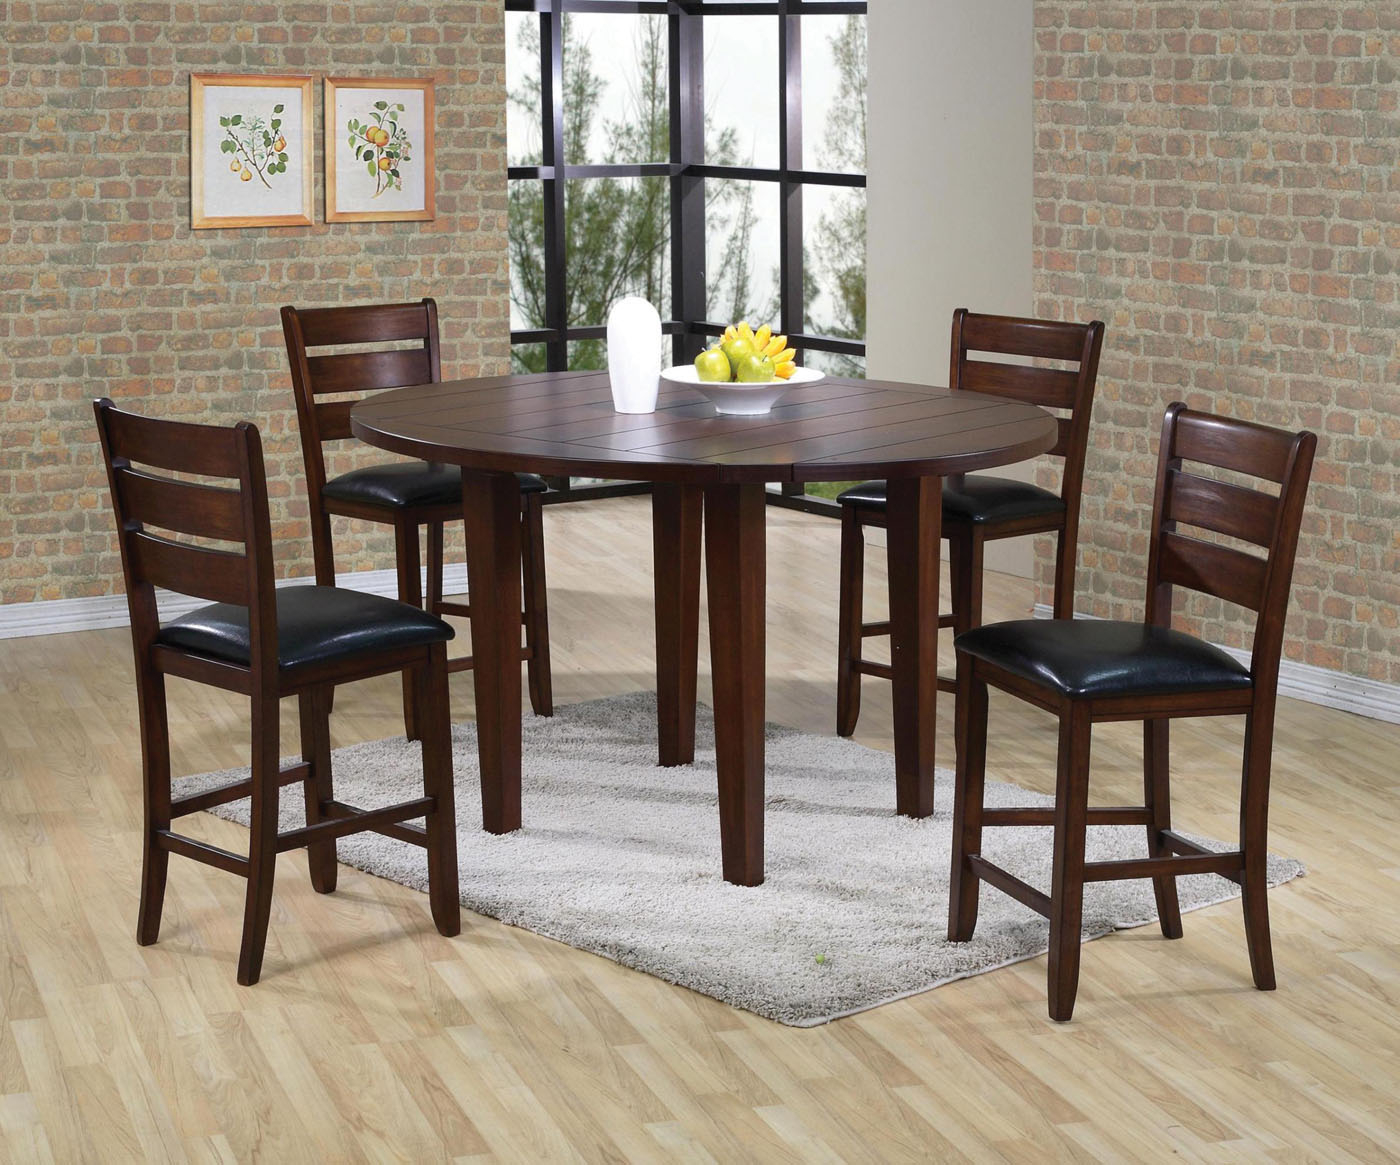 Counter height round tables